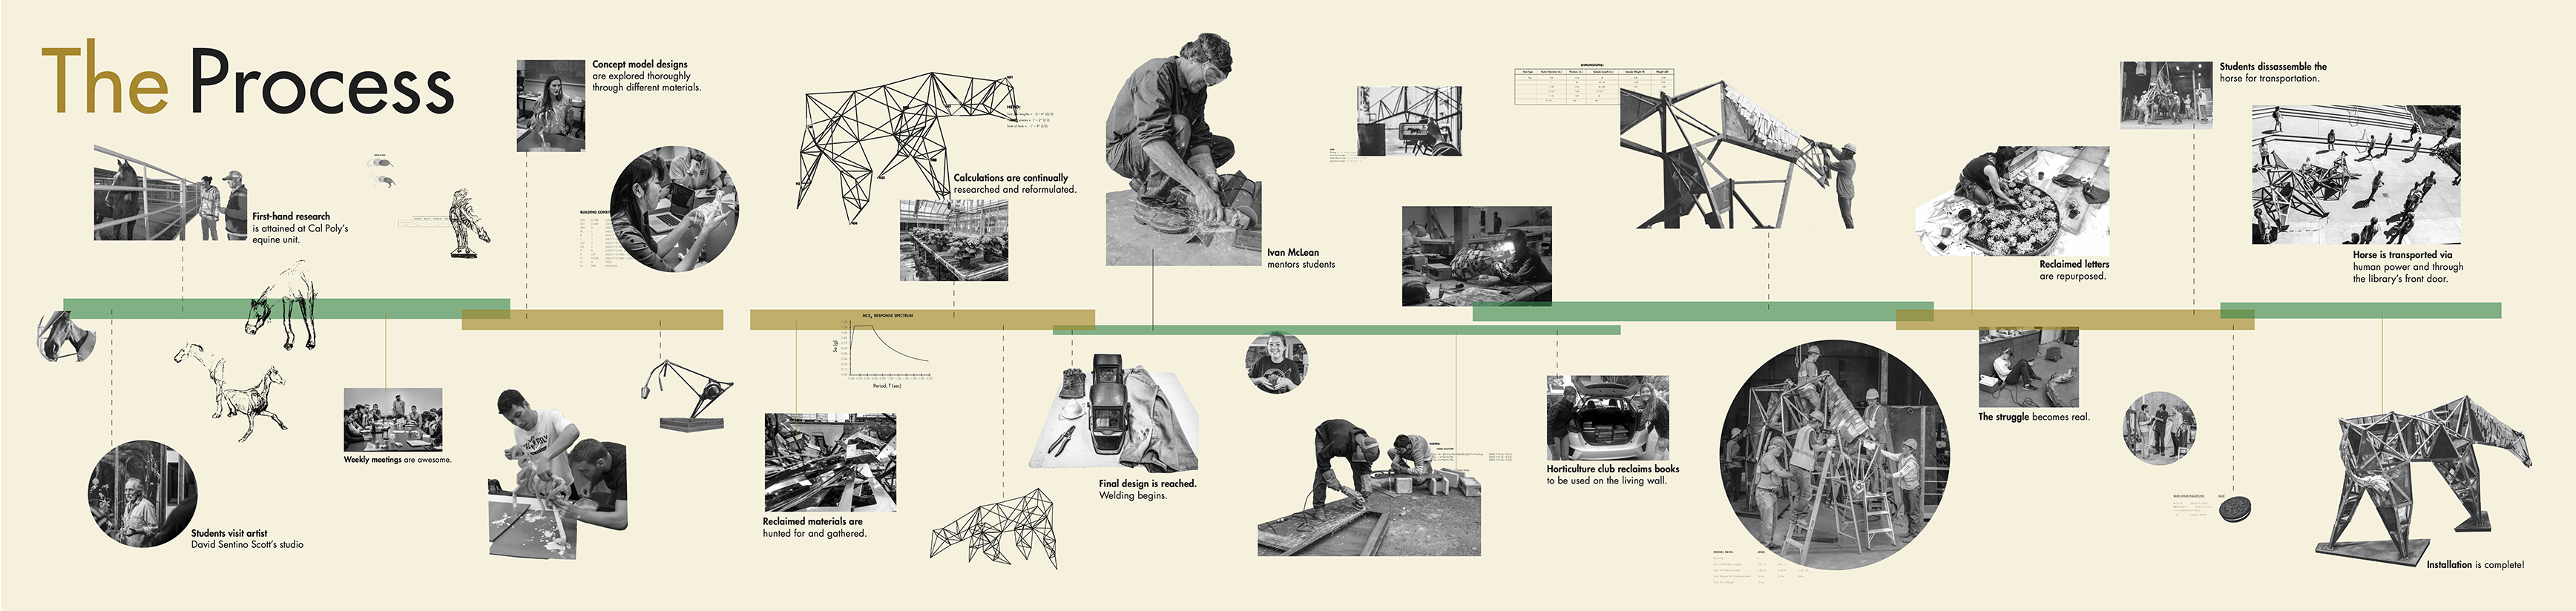 Timeline image of the building of the Mustang sculpture